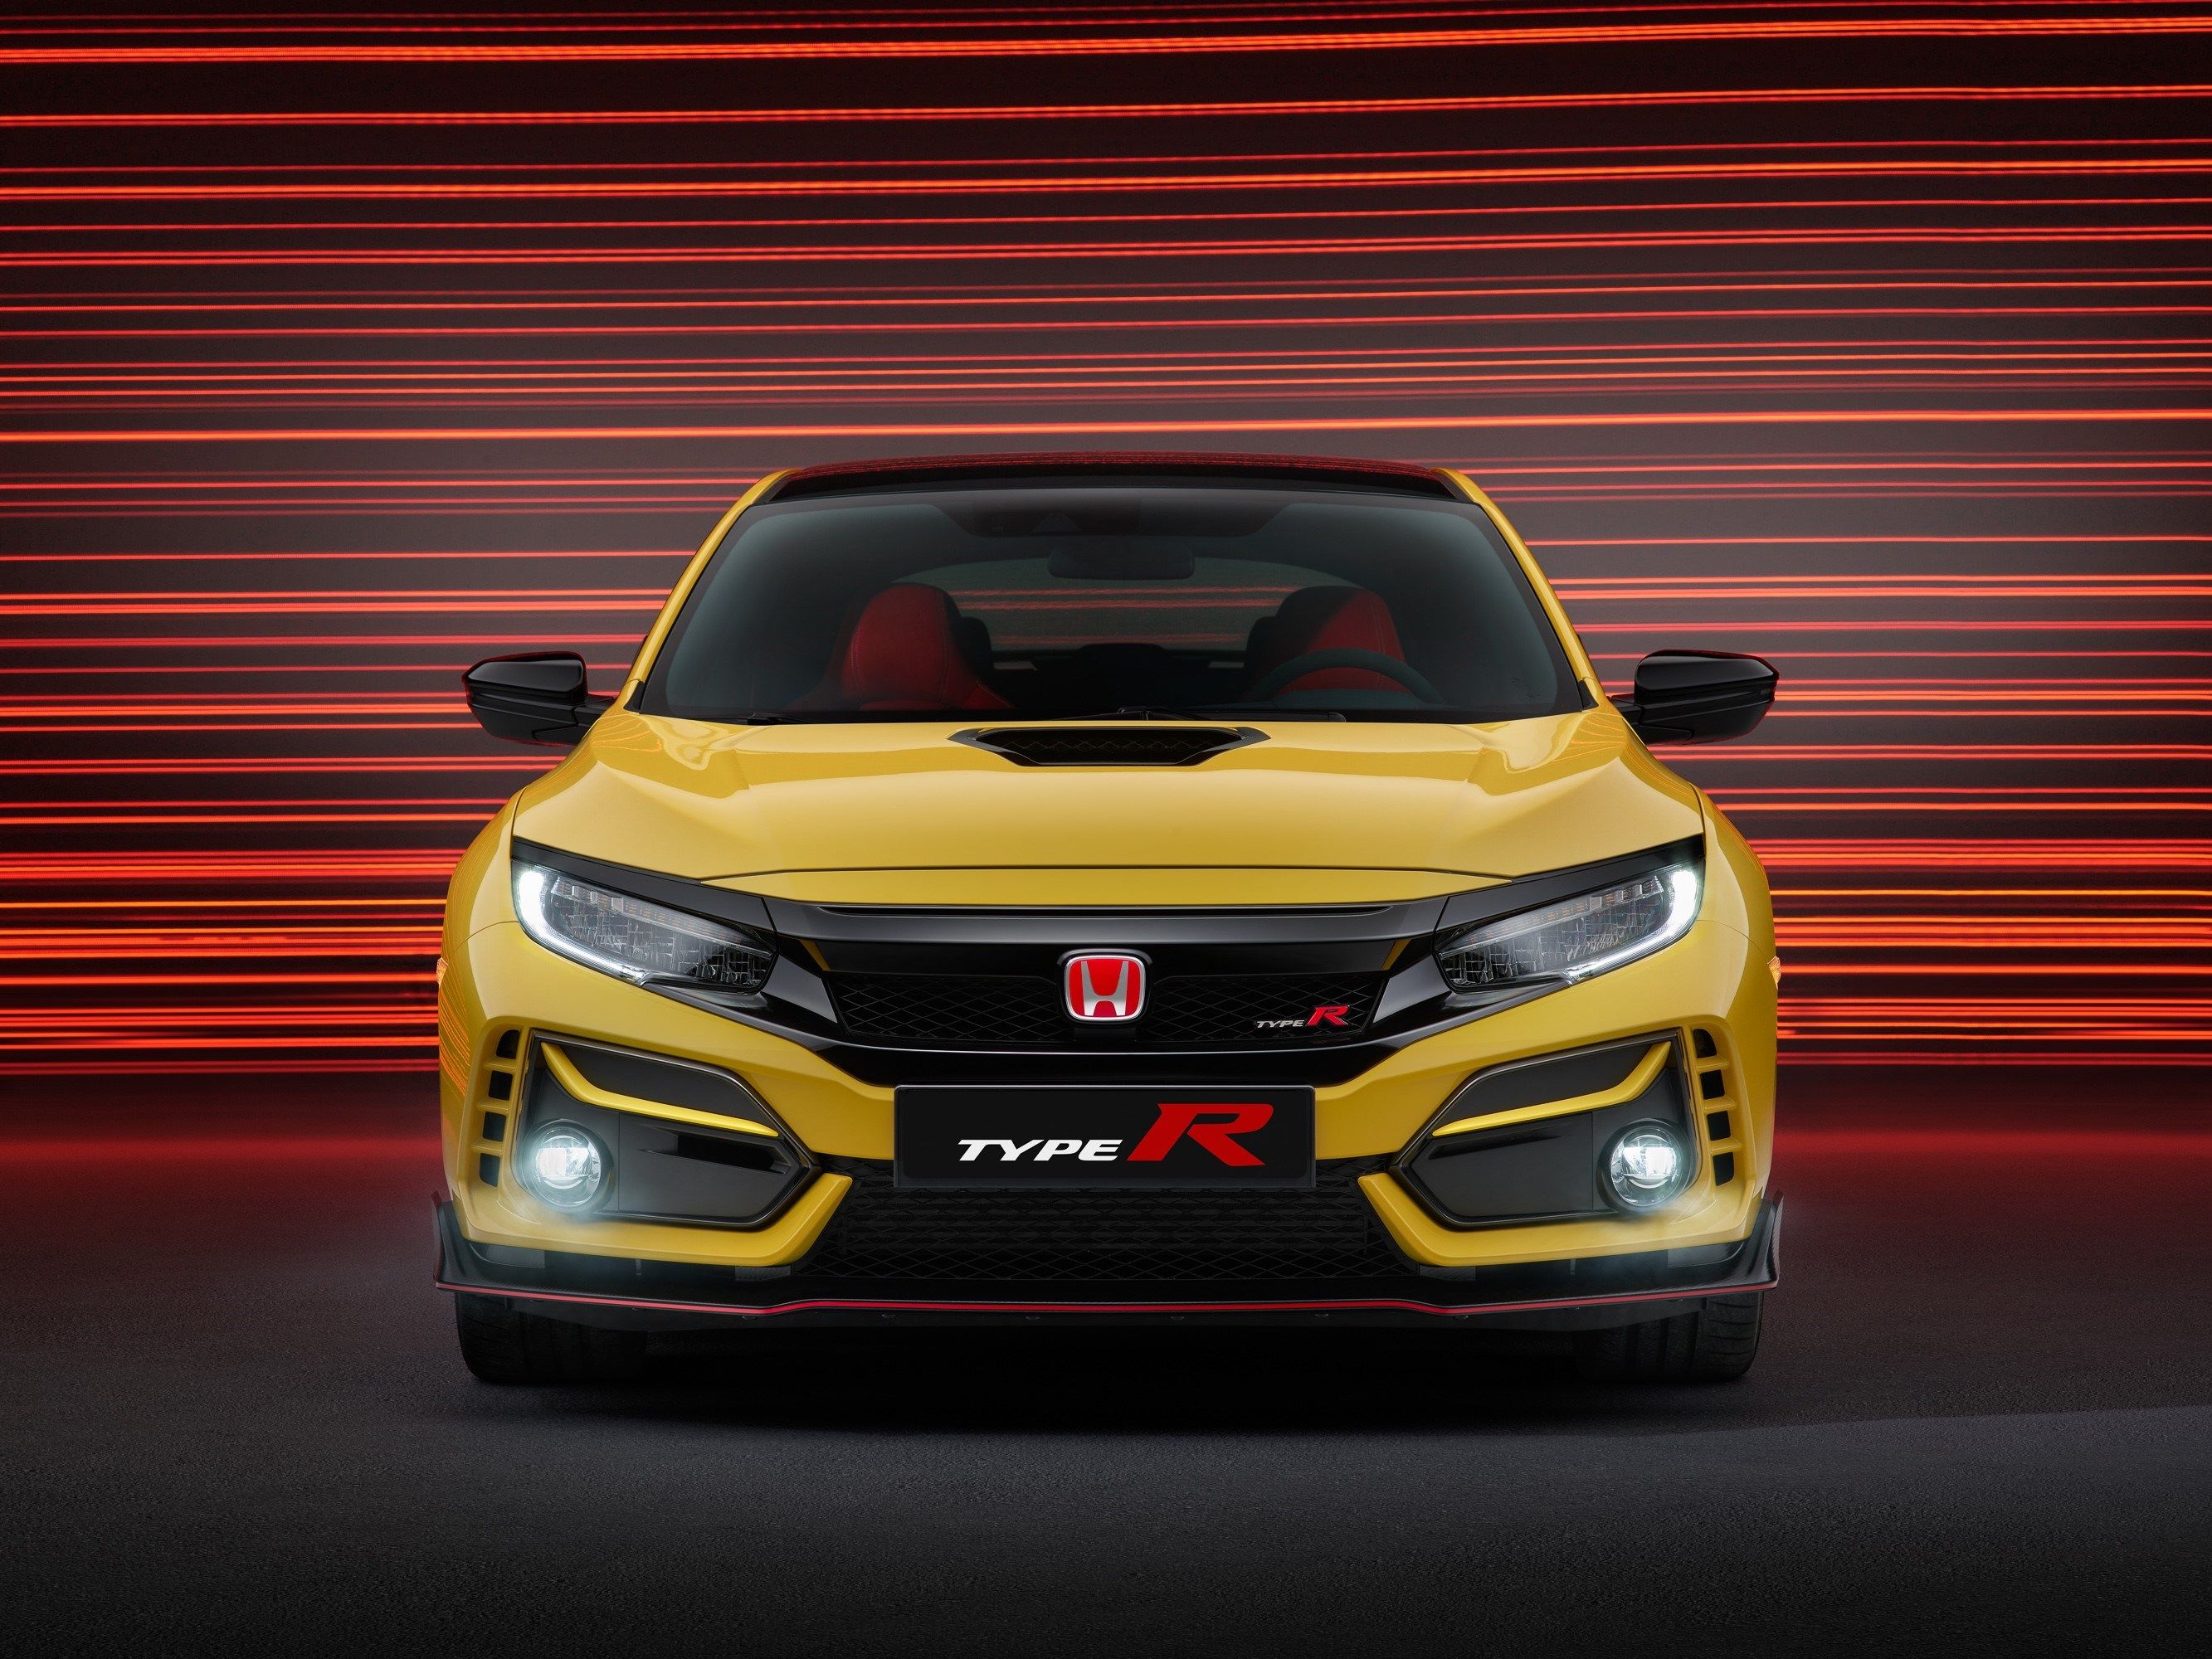 2021 Honda Civic Type R Features an Exclusive Limited Edition